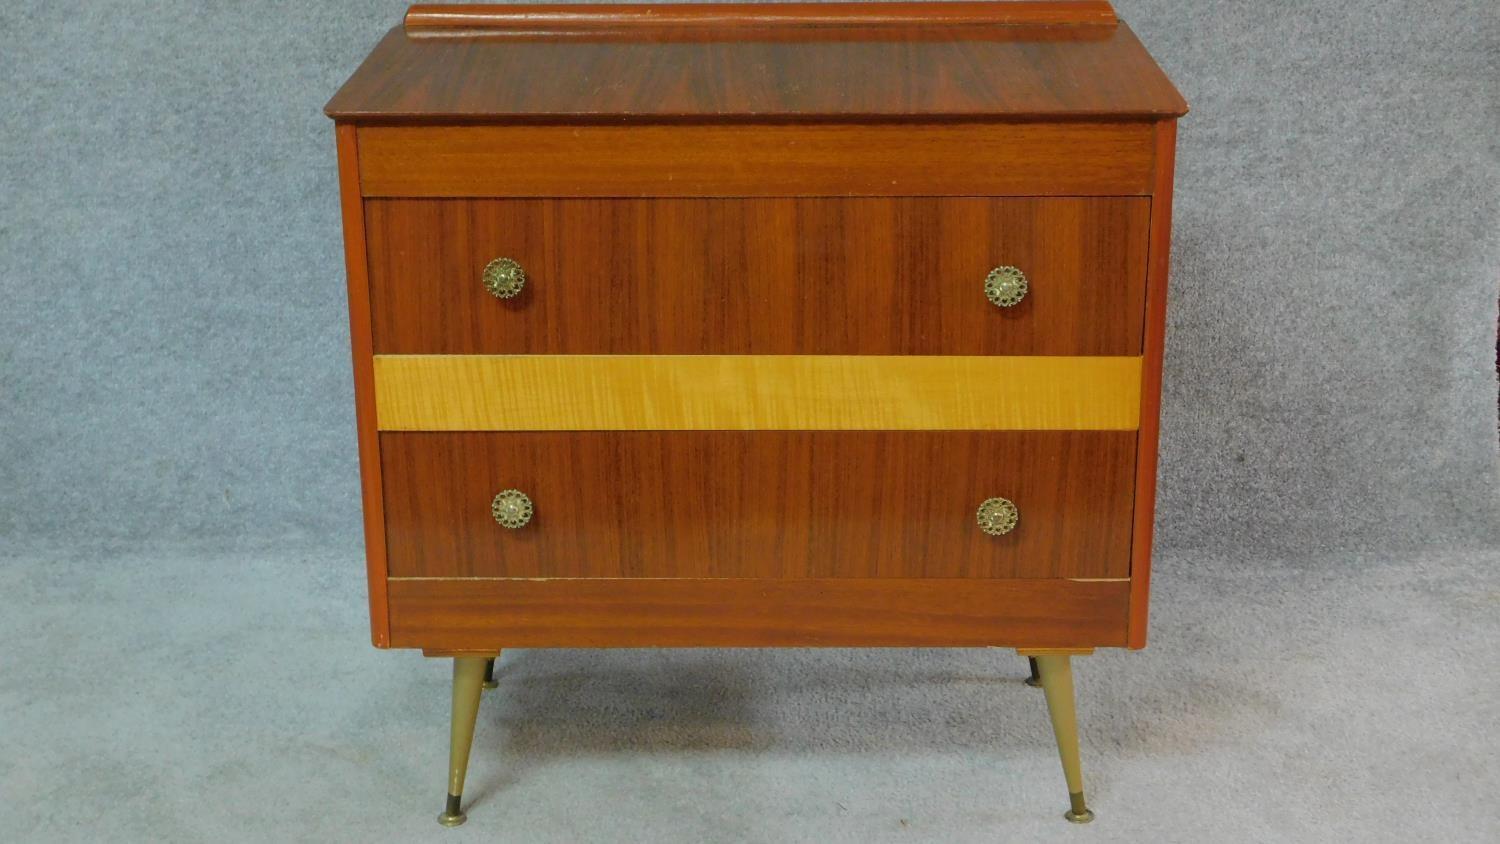 A vintage 1960's teak and satin birch inlaid chest of two long drawers on sputnik style supports.